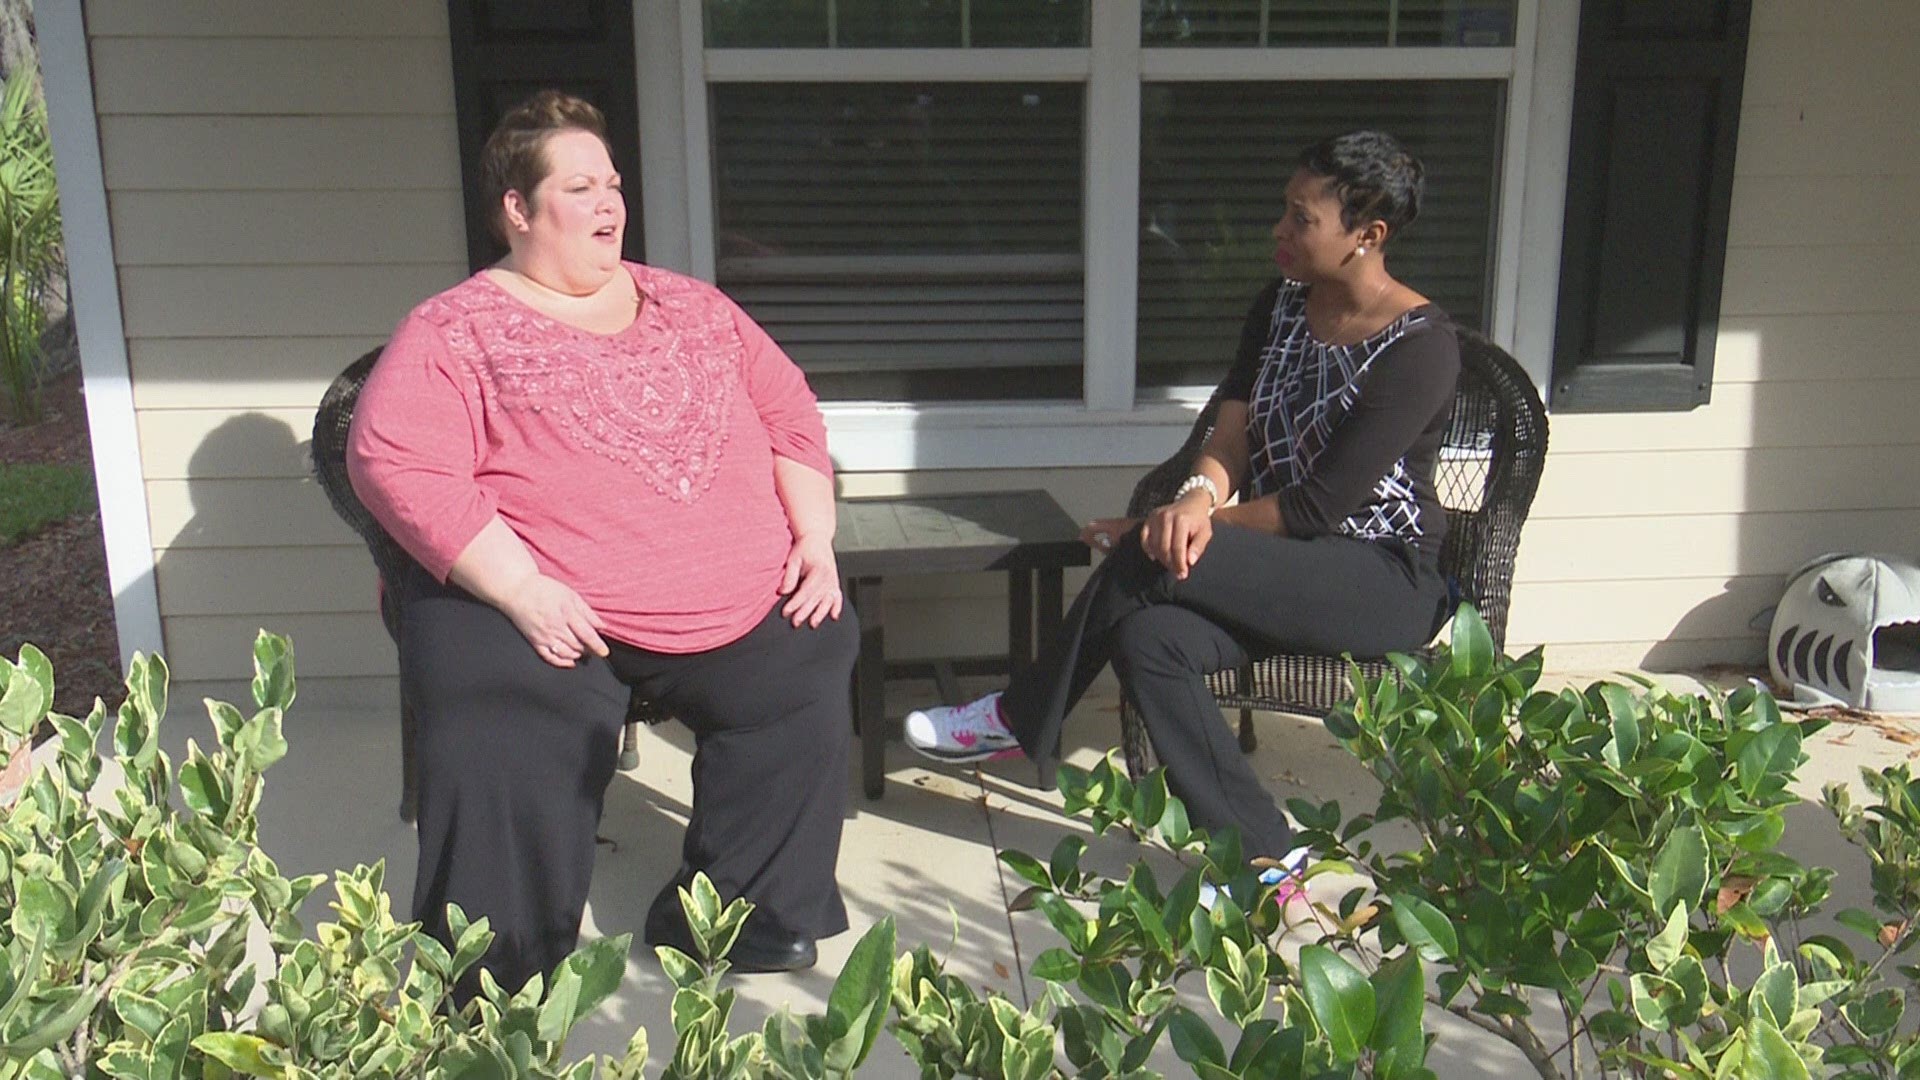 At her heaviest, Julie Dahlin weighed in at 525 pounds. In May of 2019, she took a big step and signed herself up for sleeve gastrectomy at Memorial Hospital.